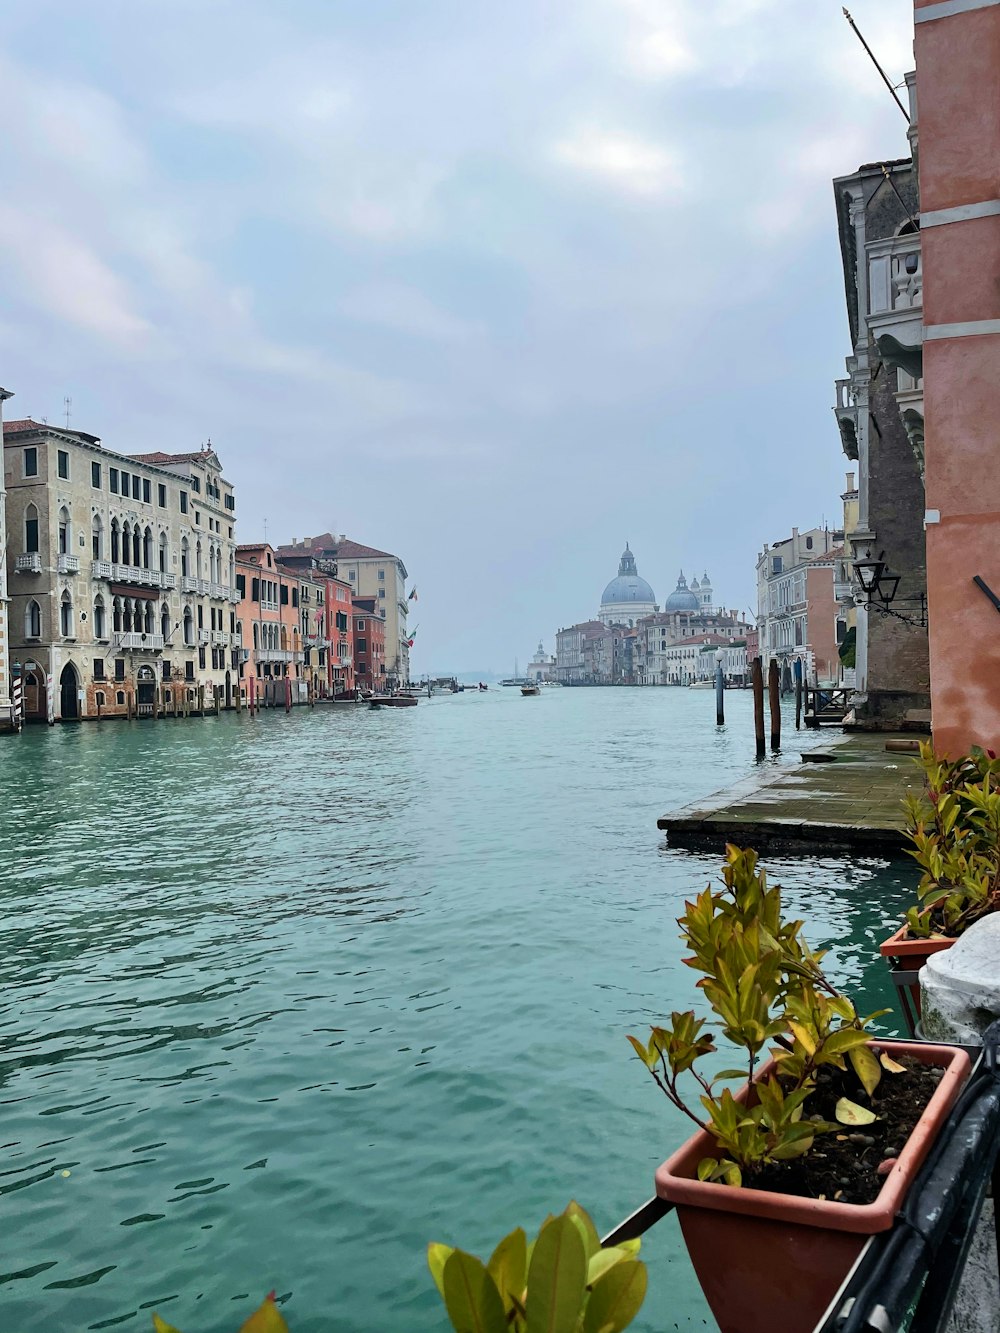 a view of a waterway in venice, italy